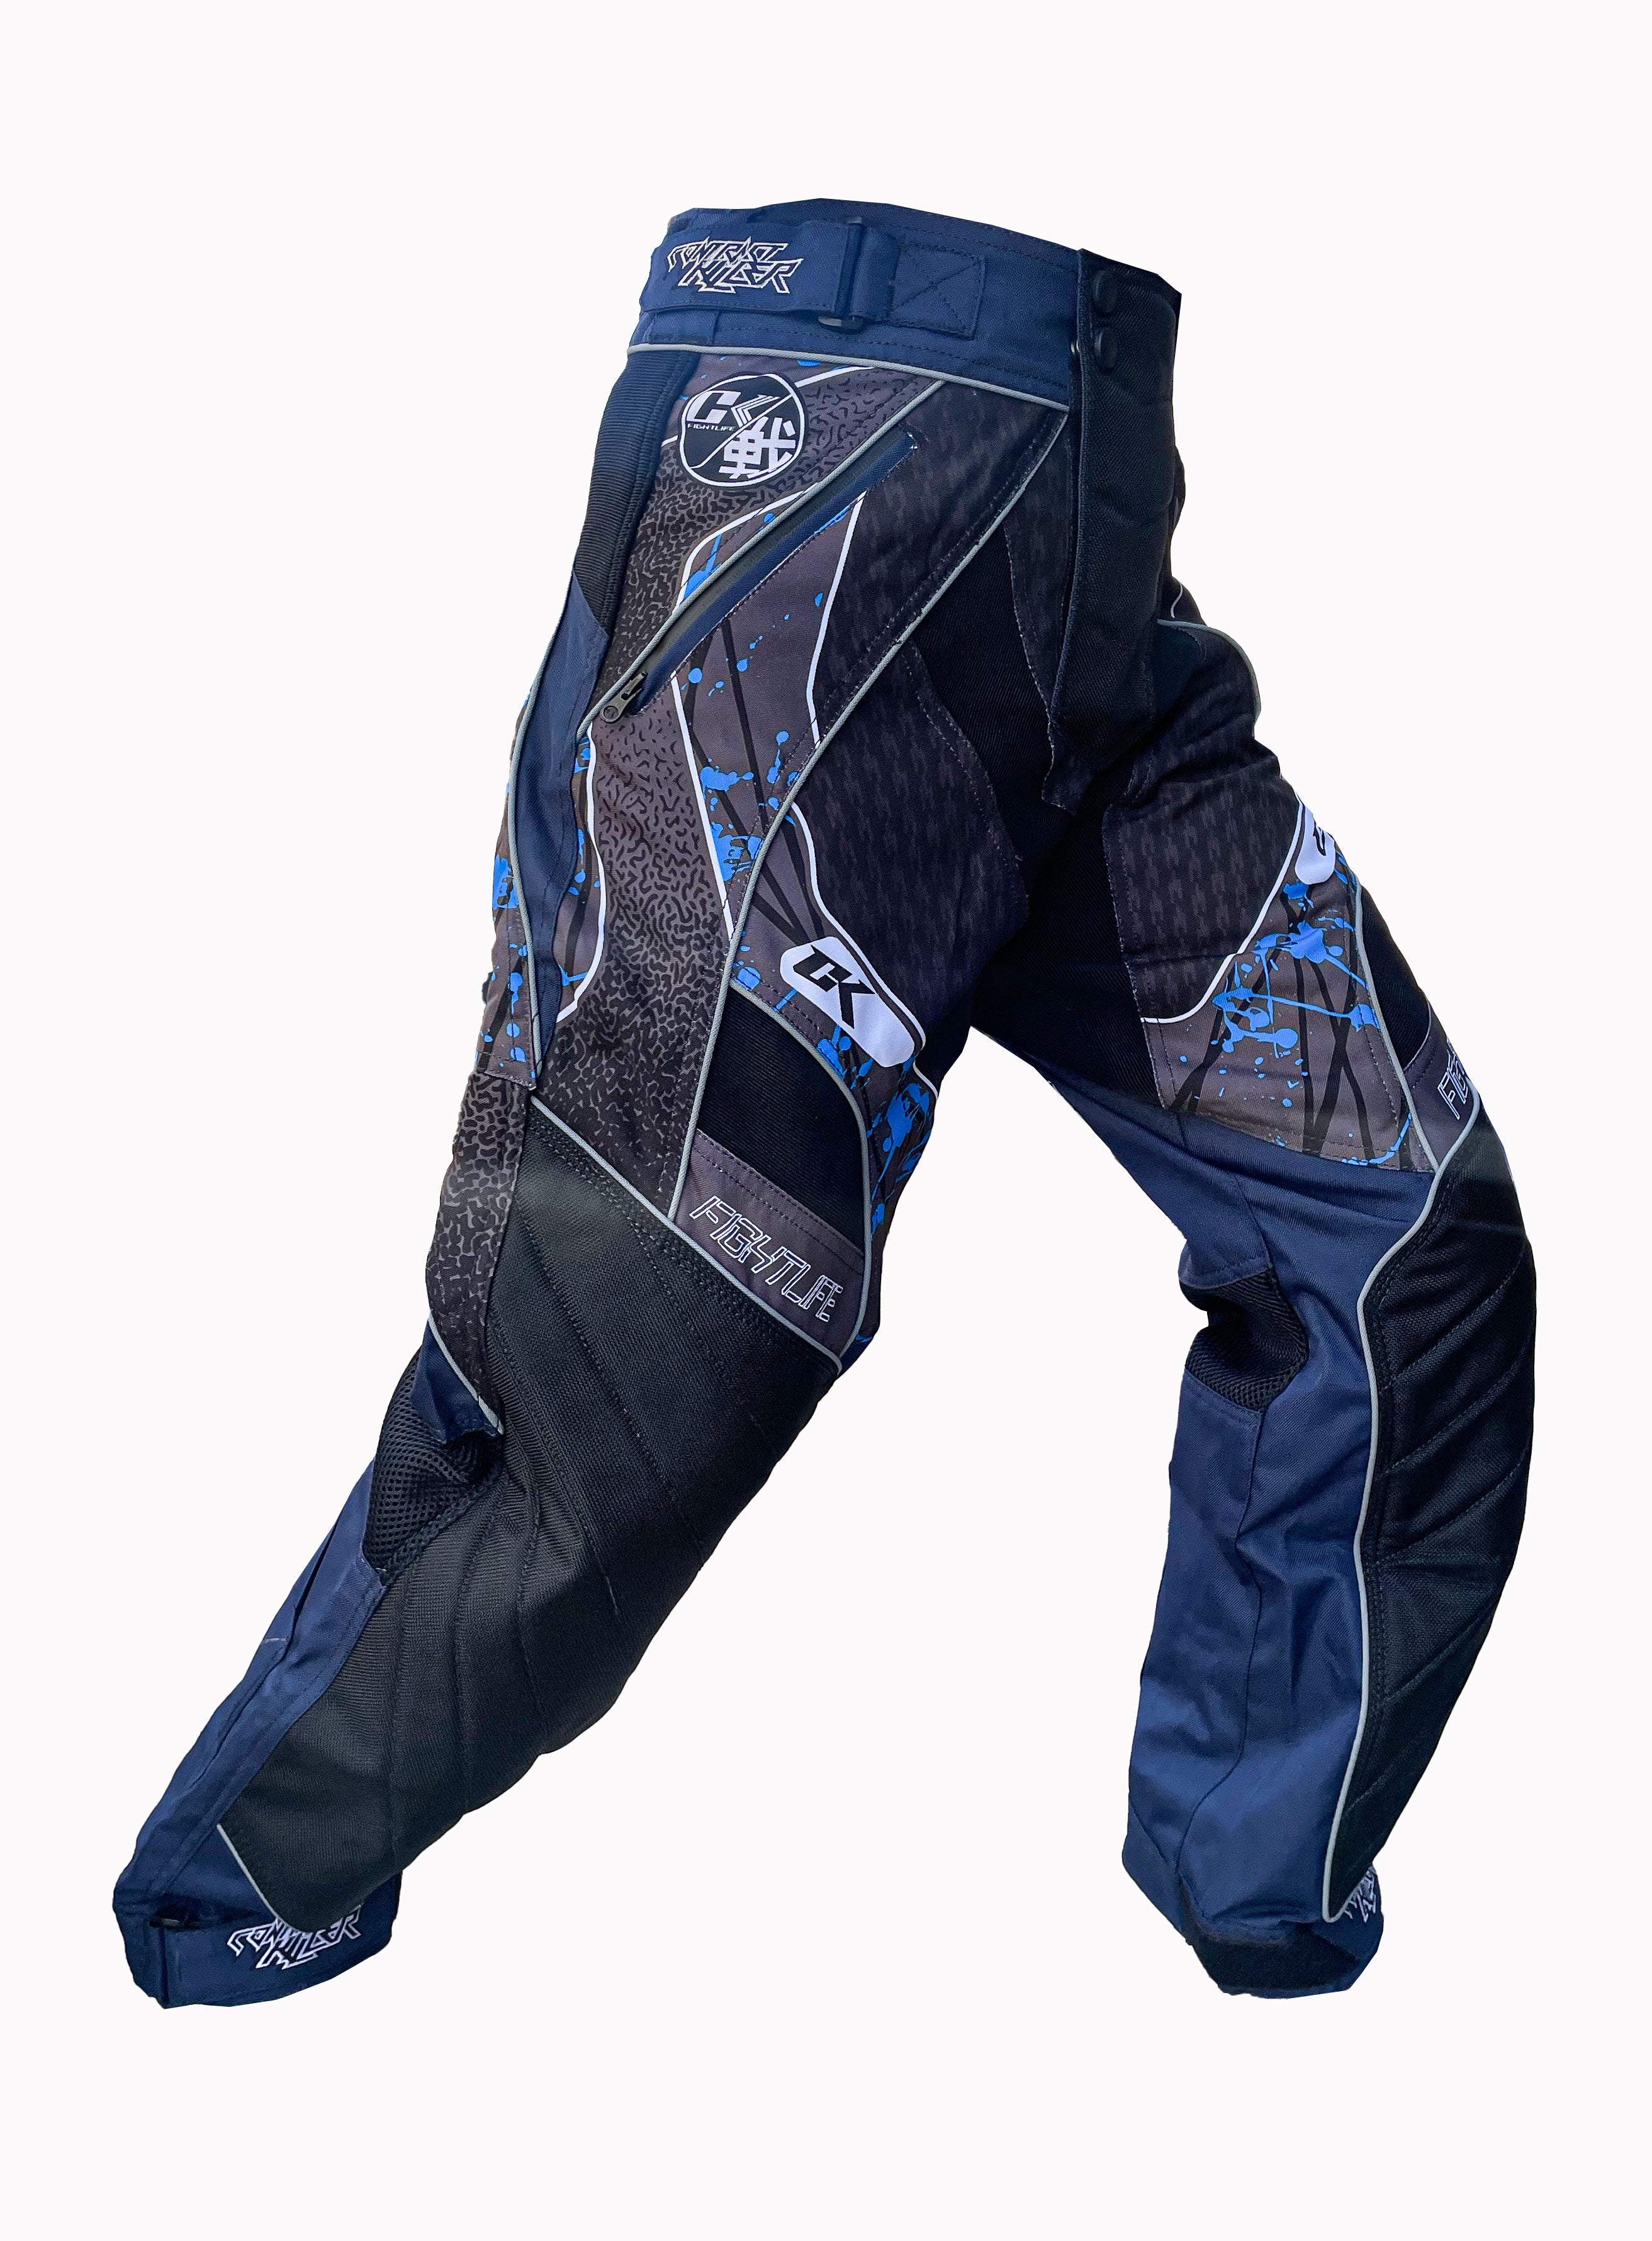 2022 CK PJ Paintball Pants - COOL GRAY NEW COLORWAY - CK Fight Life